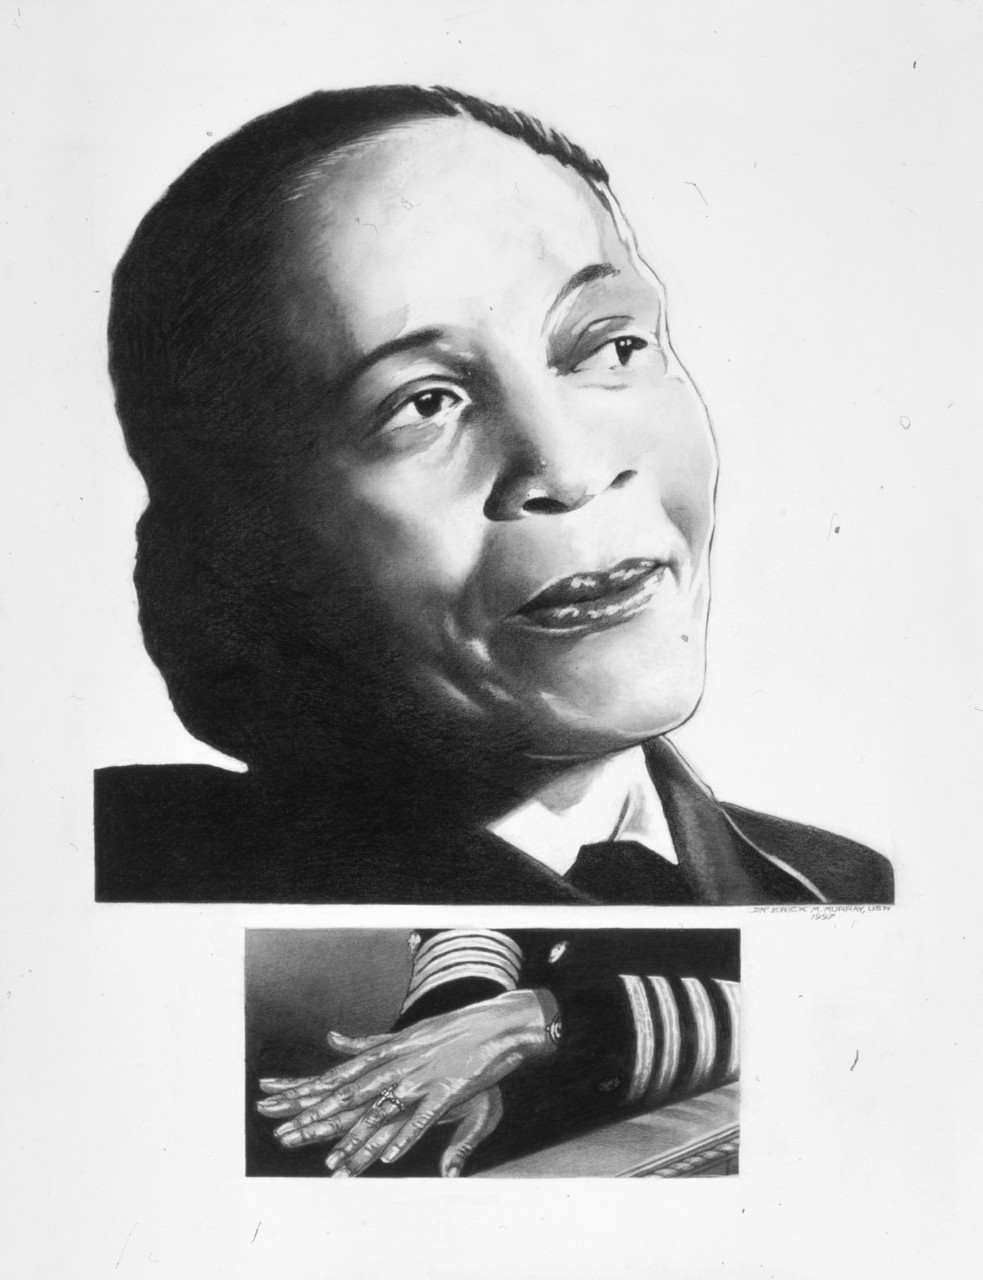 A portrait of Captain Joan Bynum below her portrait is drawing of her hands one on top of the other.